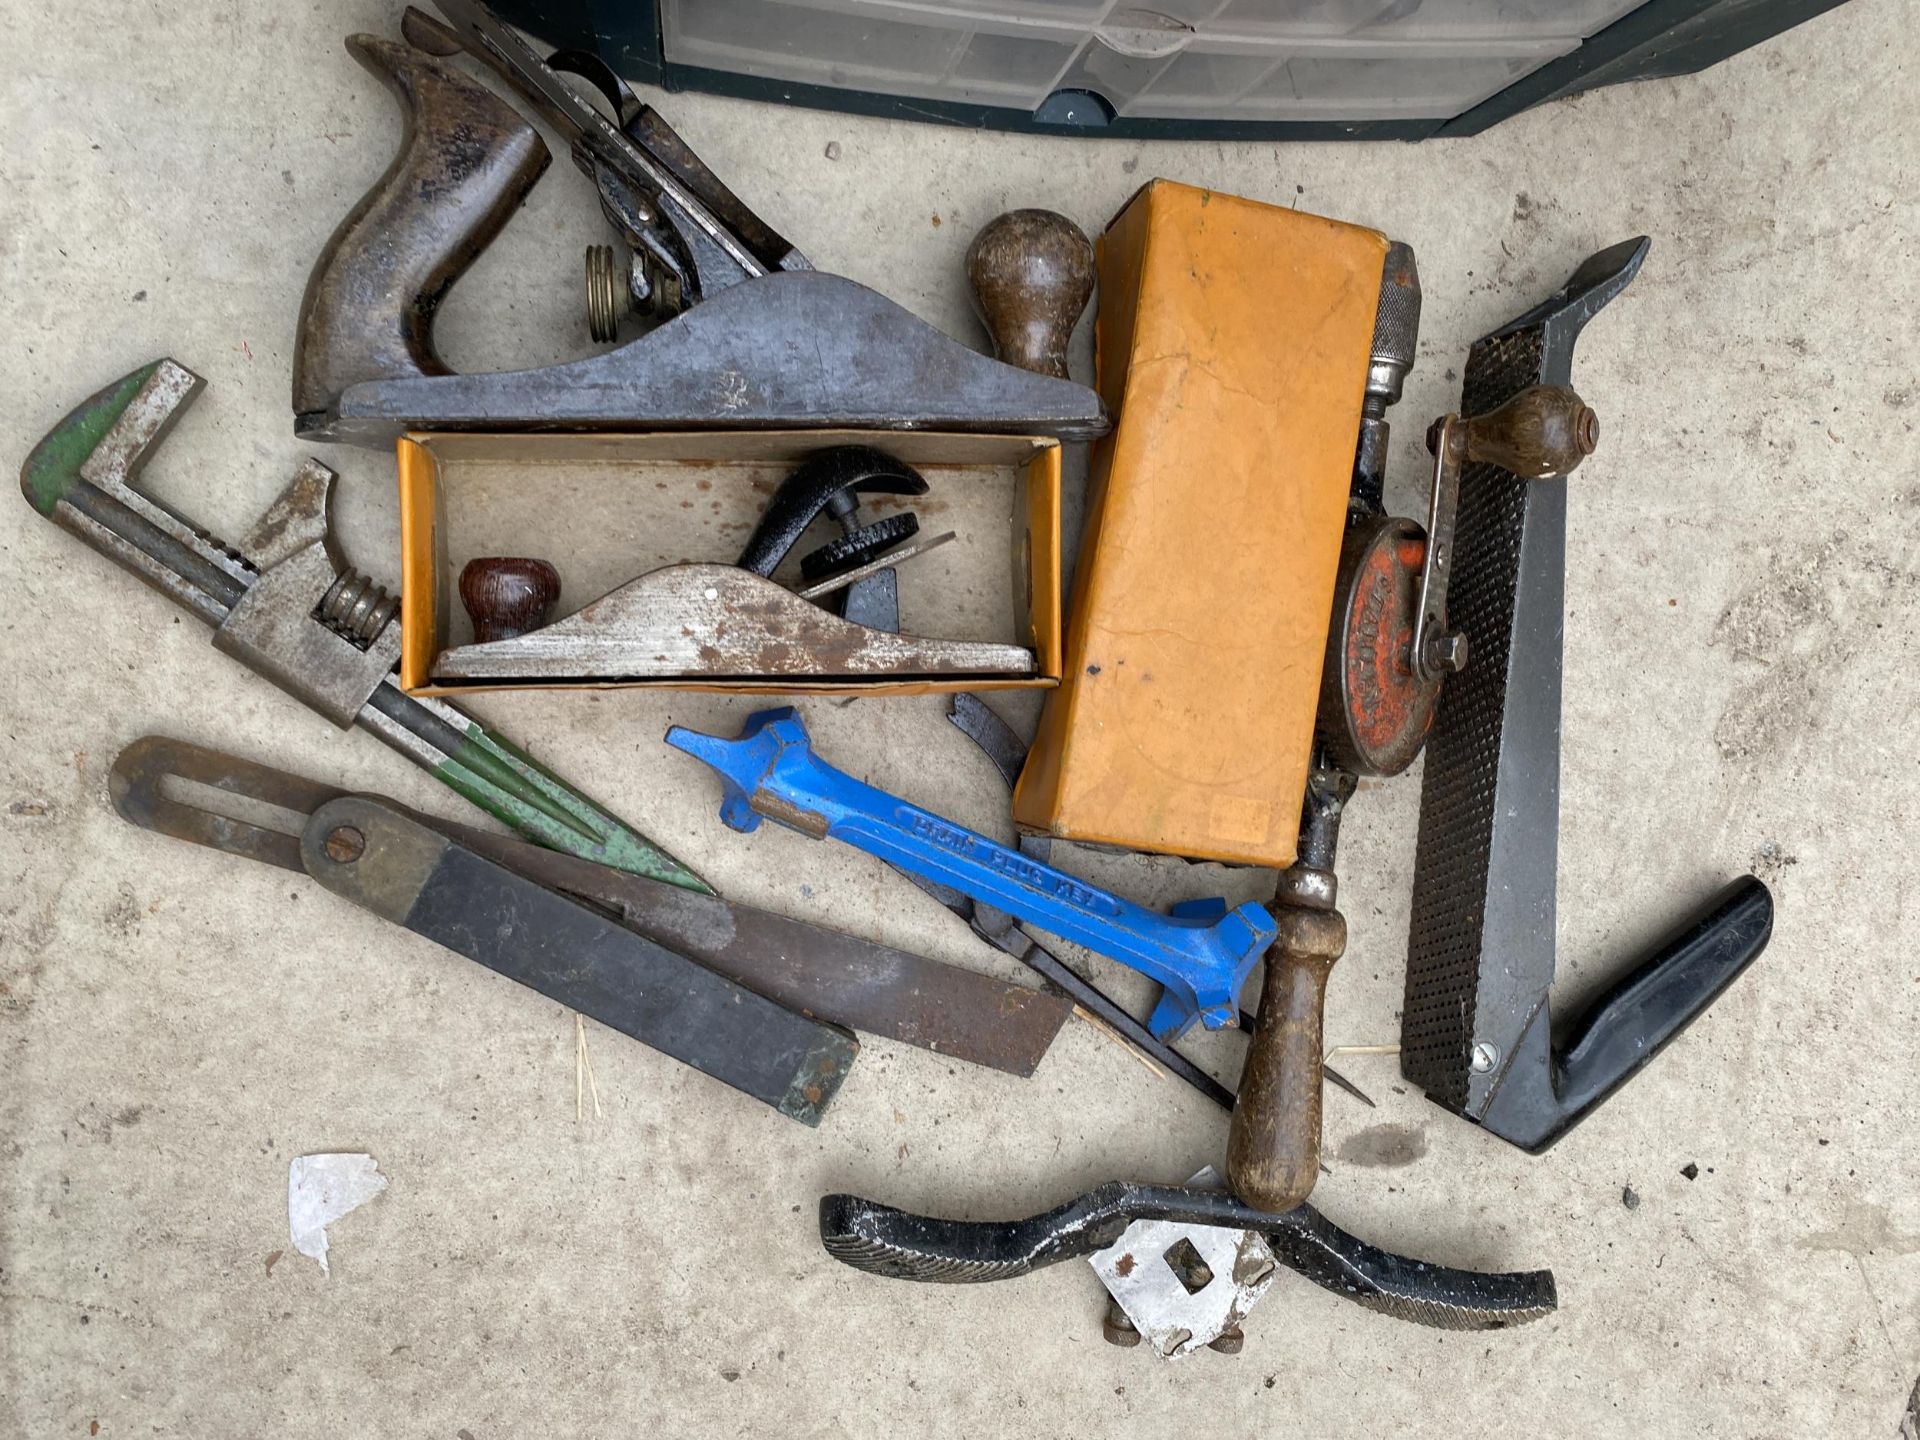 A PLASTIC TOOL BOX WITH AN ASSORTMENT OF HAND TOOLS TO INCLUDE LATHE CHISELS, WOOD PLANE AND BRACE - Image 2 of 3